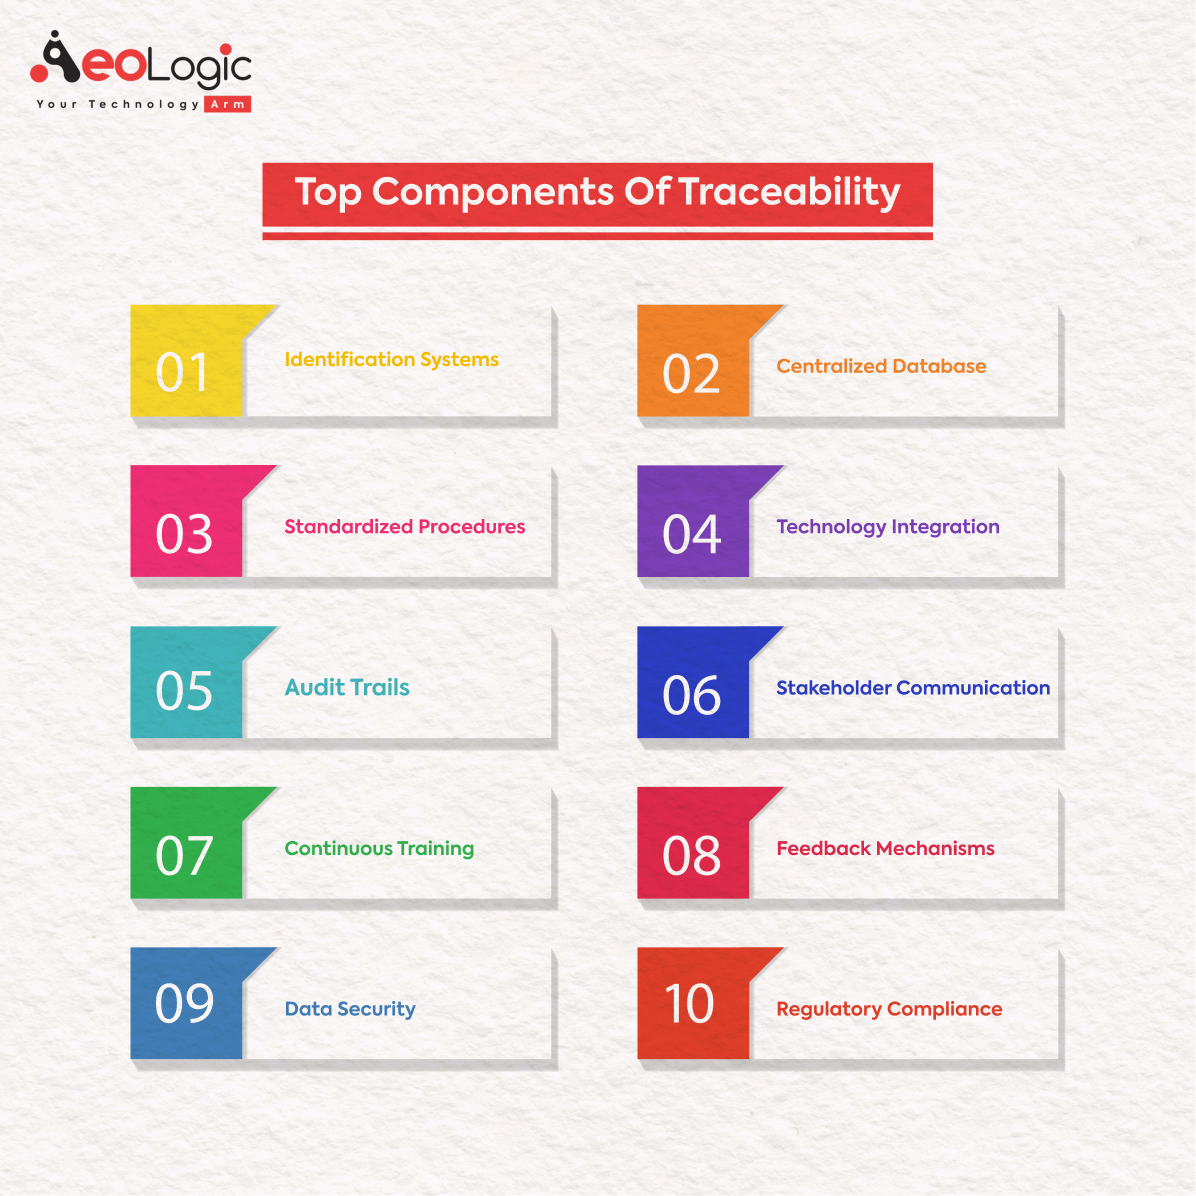 Top Components of Traceability